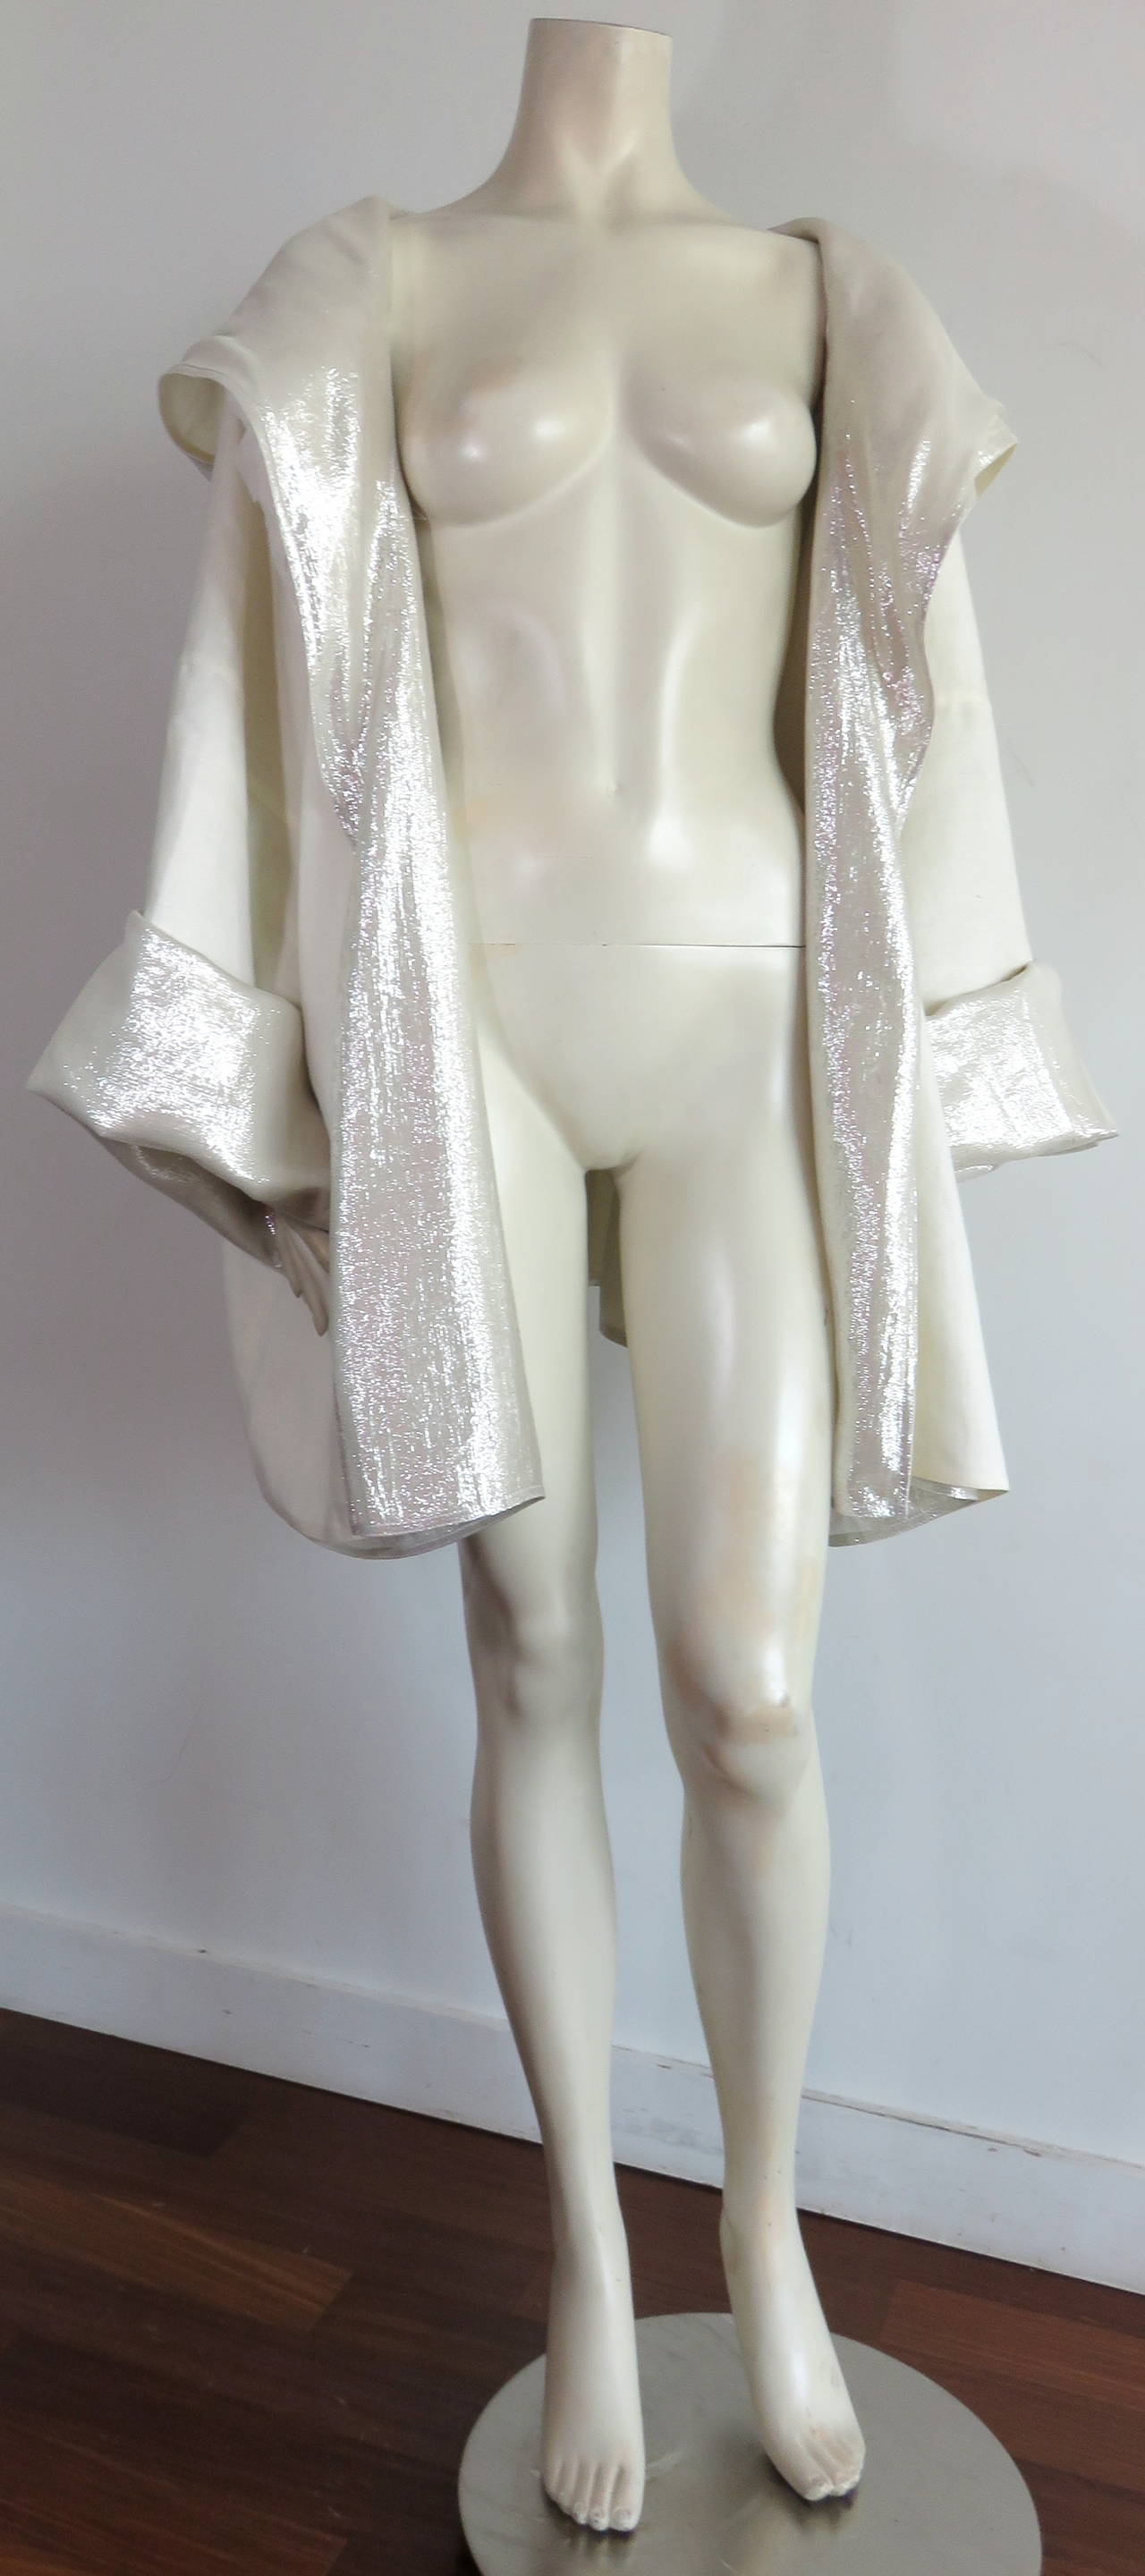 Stunning, 1980's ZORAN, White/Silver hooded reversible jacket.

Flour-white, linen fabrication with soft, light-weight, metallic silver fabric at reverse side.

Signature, 'minimalist chic' style with an open front design, and an intentional,